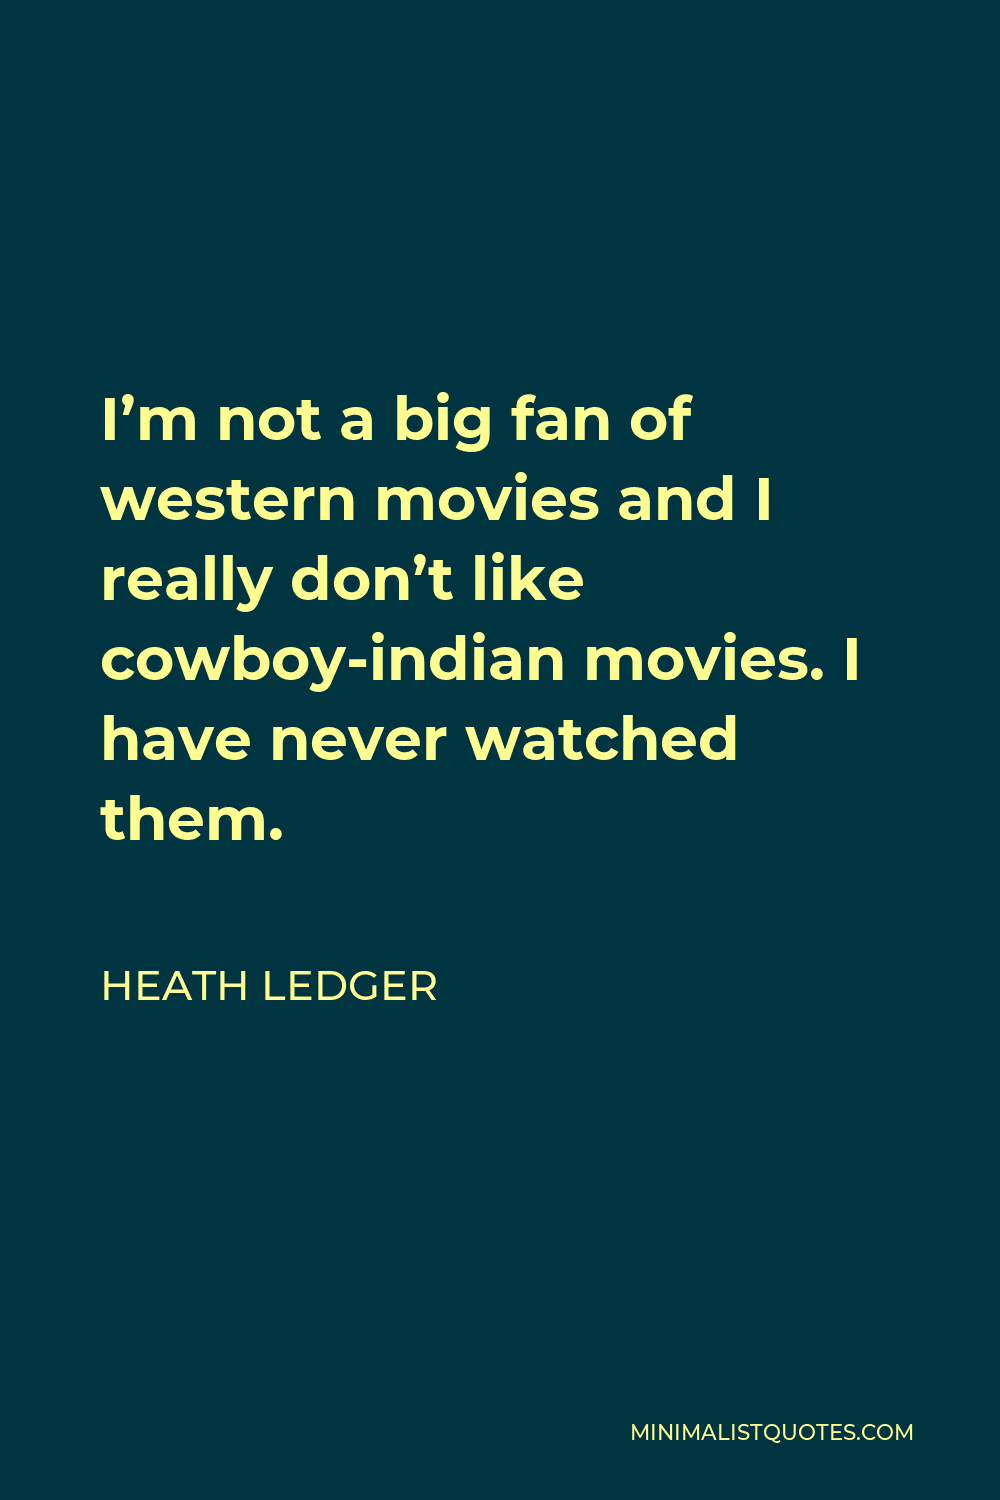 Heath Ledger Quote - I’m not a big fan of western movies and I really don’t like cowboy-indian movies. I have never watched them.